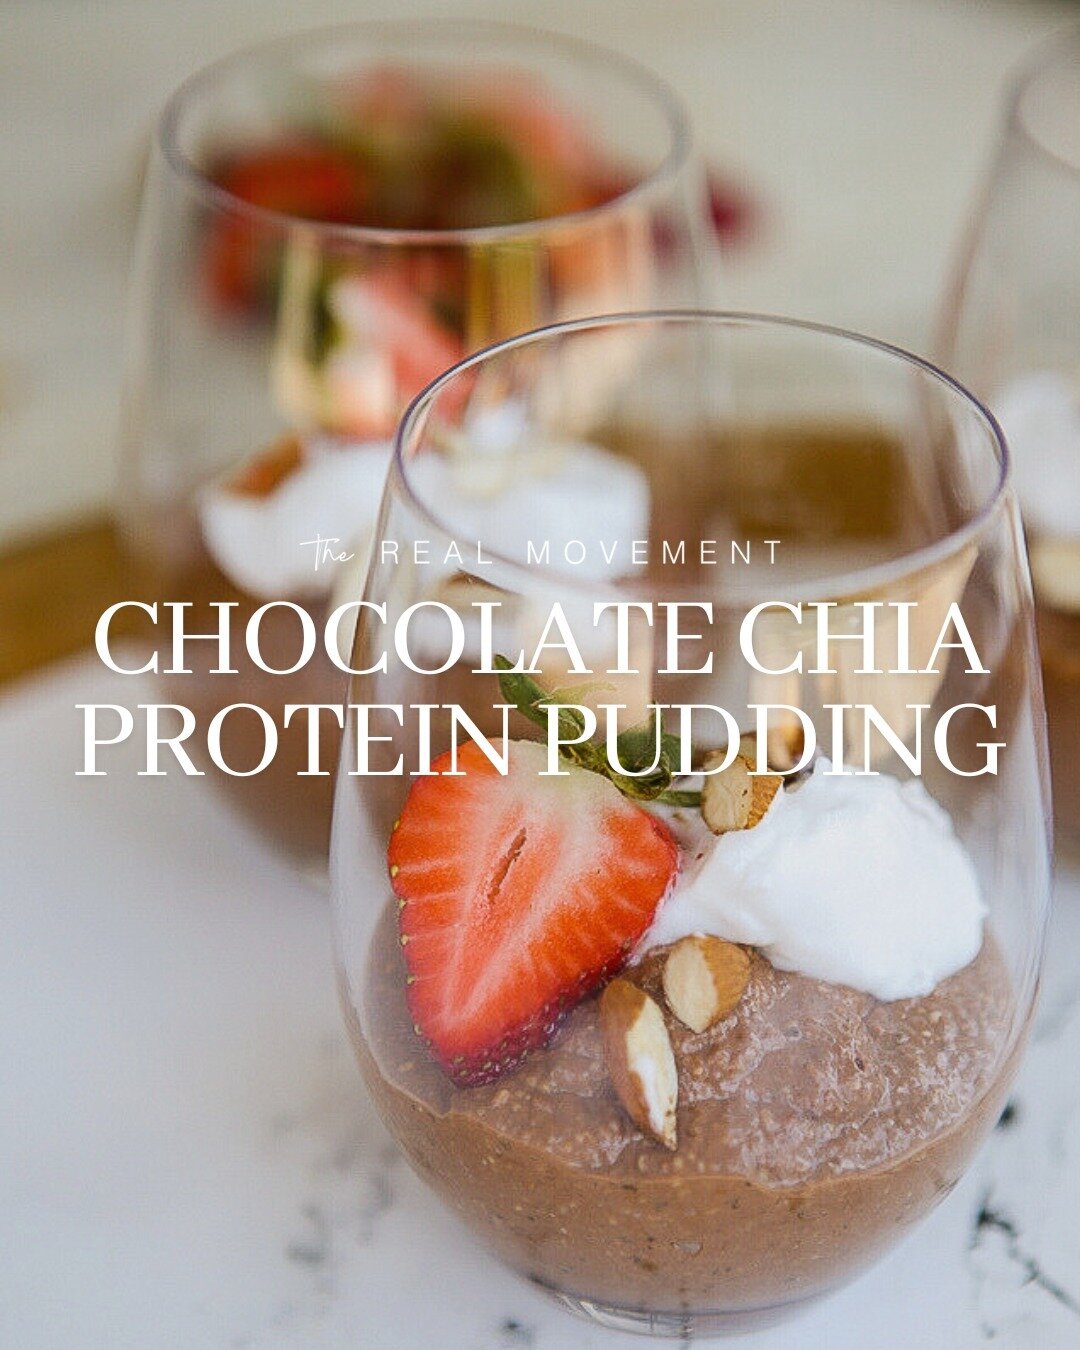 Let&rsquo;s get into the Easter spirit with these delicious Chocolate Chia Protein Puddings! 🐰🥚🐣🌷⁠
⁠
Whether you&rsquo;re looking to kick-start the day with some chocolatey deliciousness or are looking for a slightly more substantial snack betwee